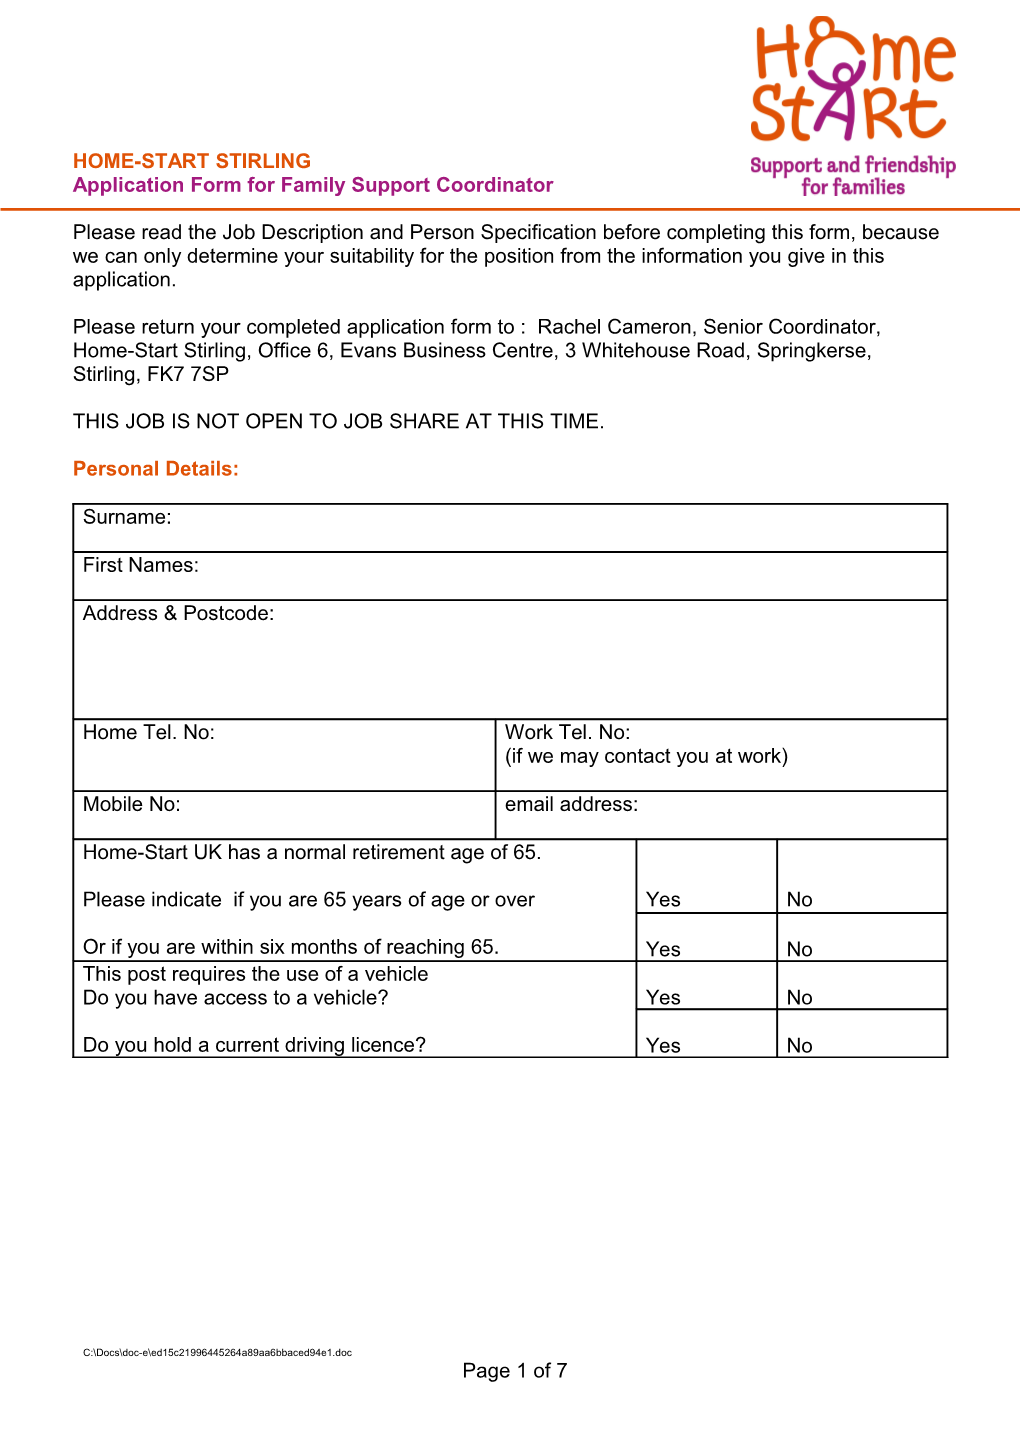 Application Form for Family Support Coordinator